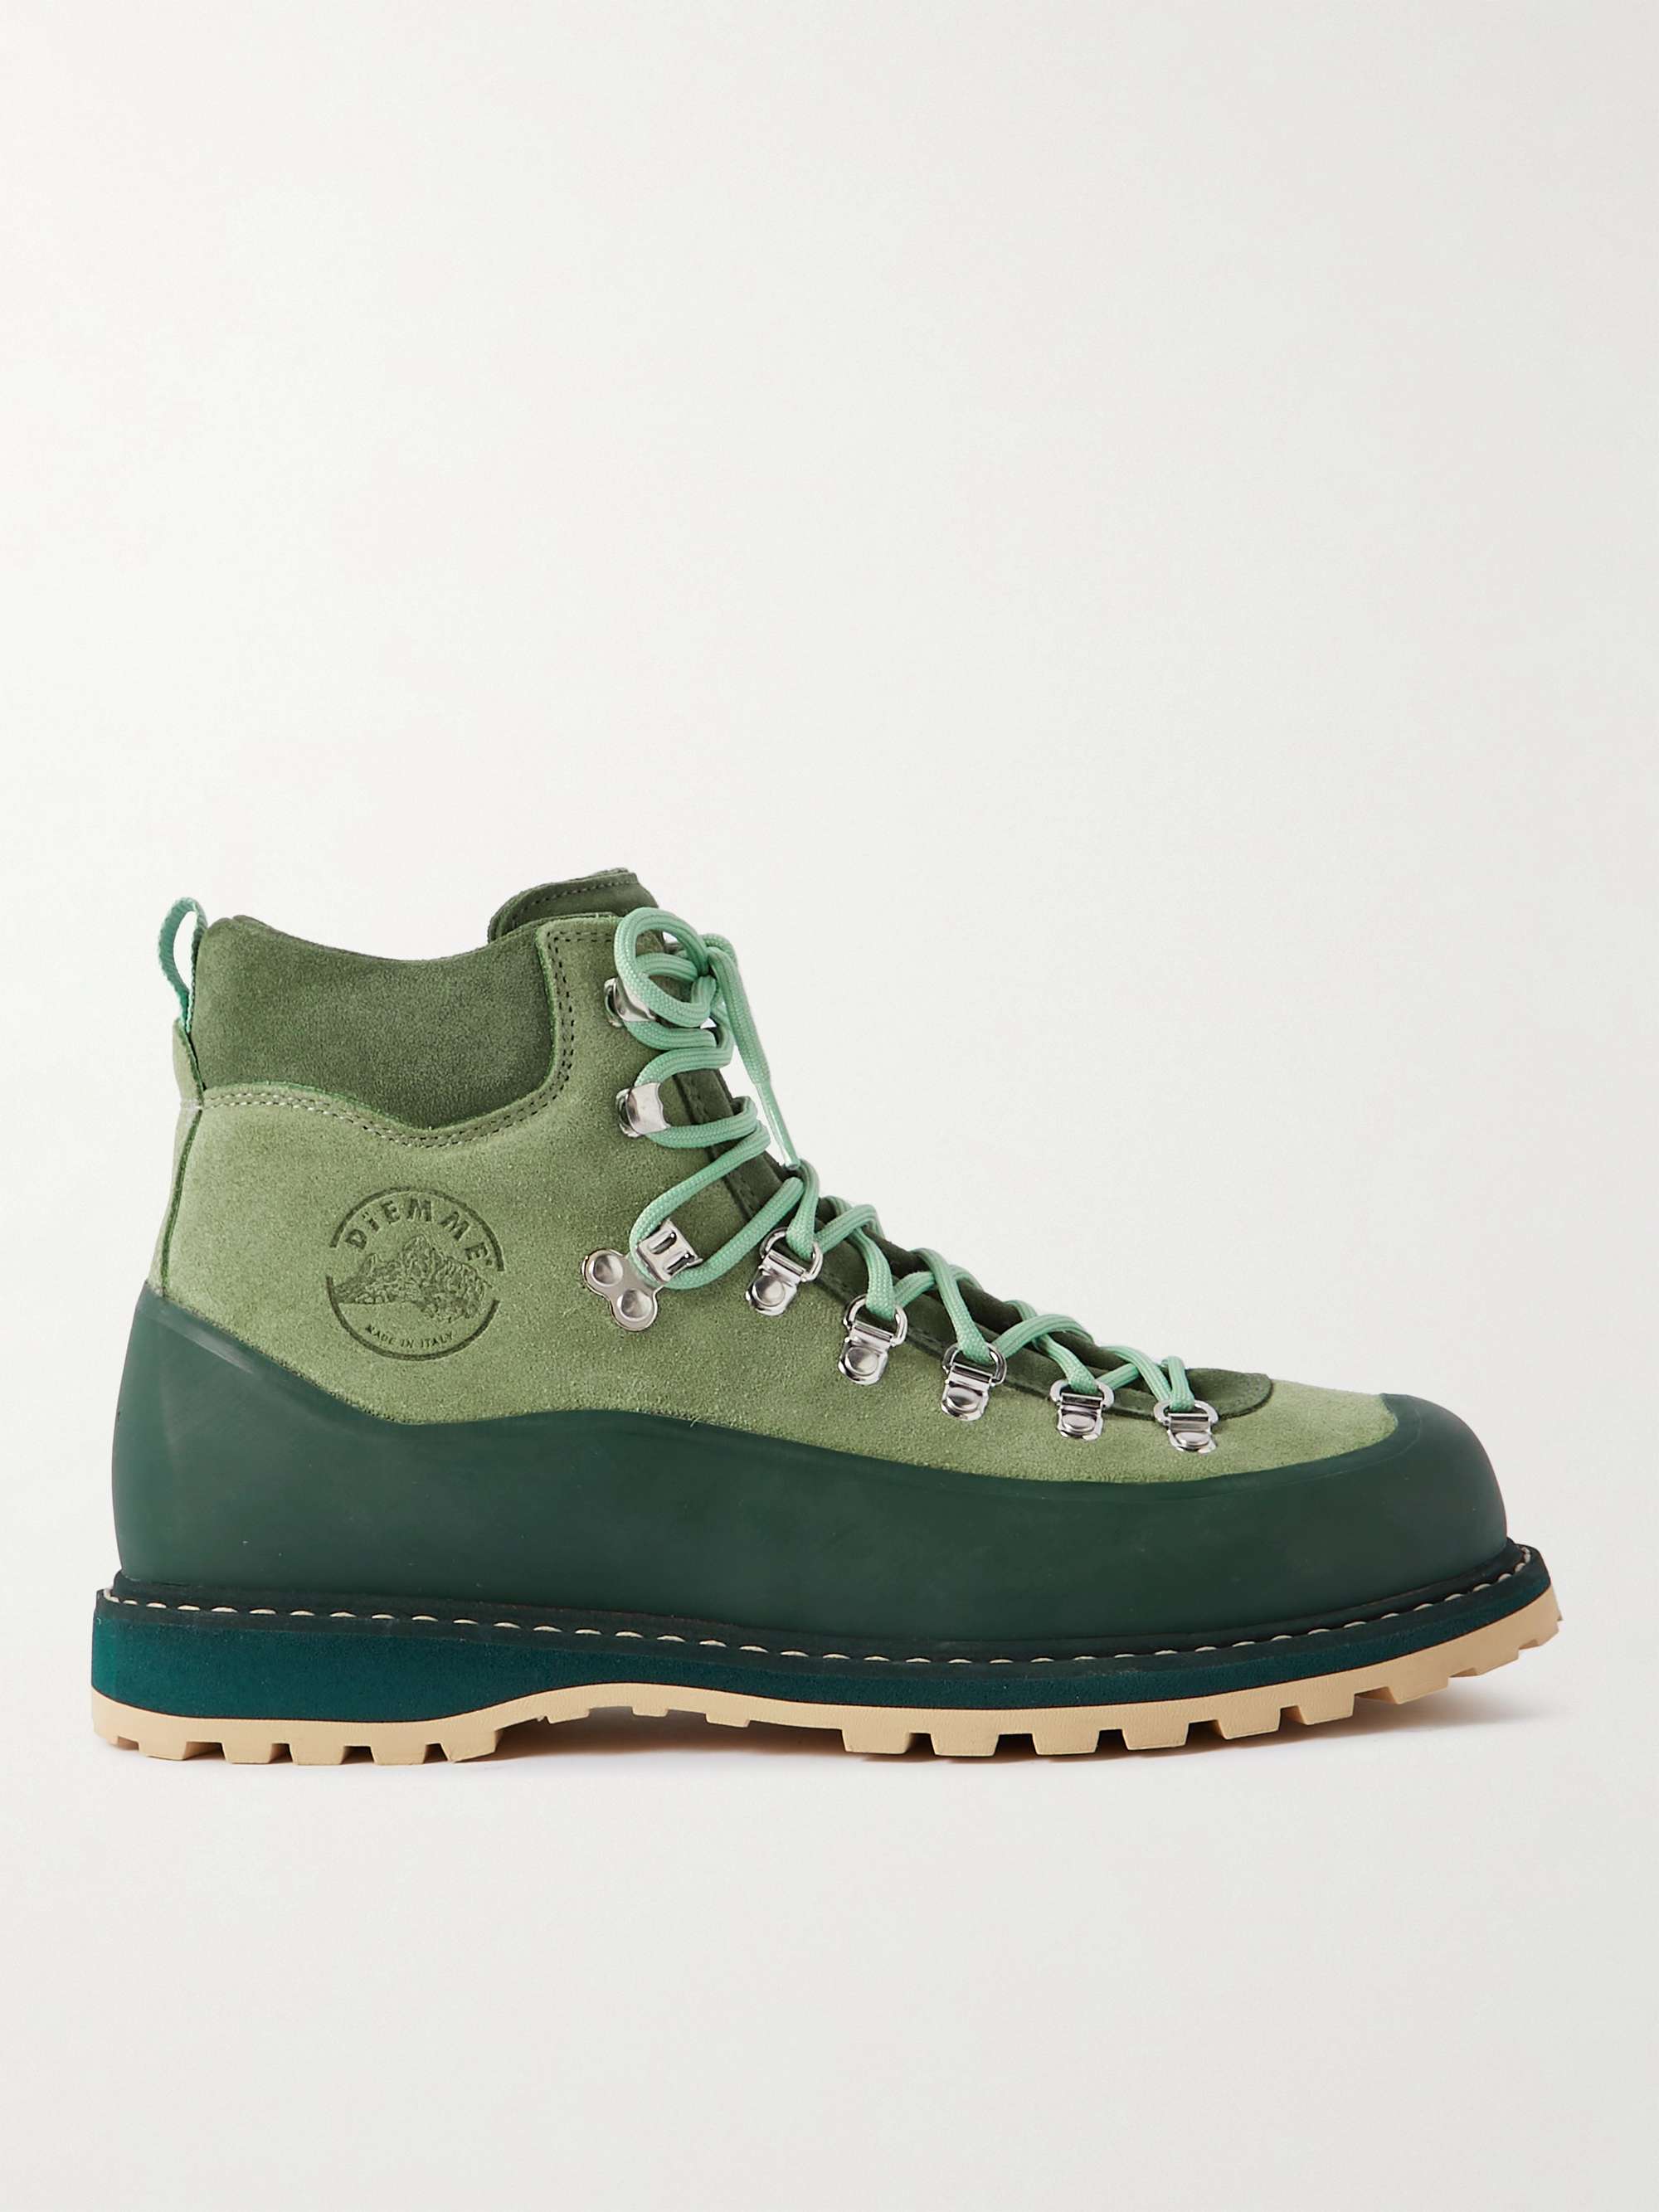 Green Roccia Vet Suede and Rubber Hiking Boots | DIEMME | MR PORTER